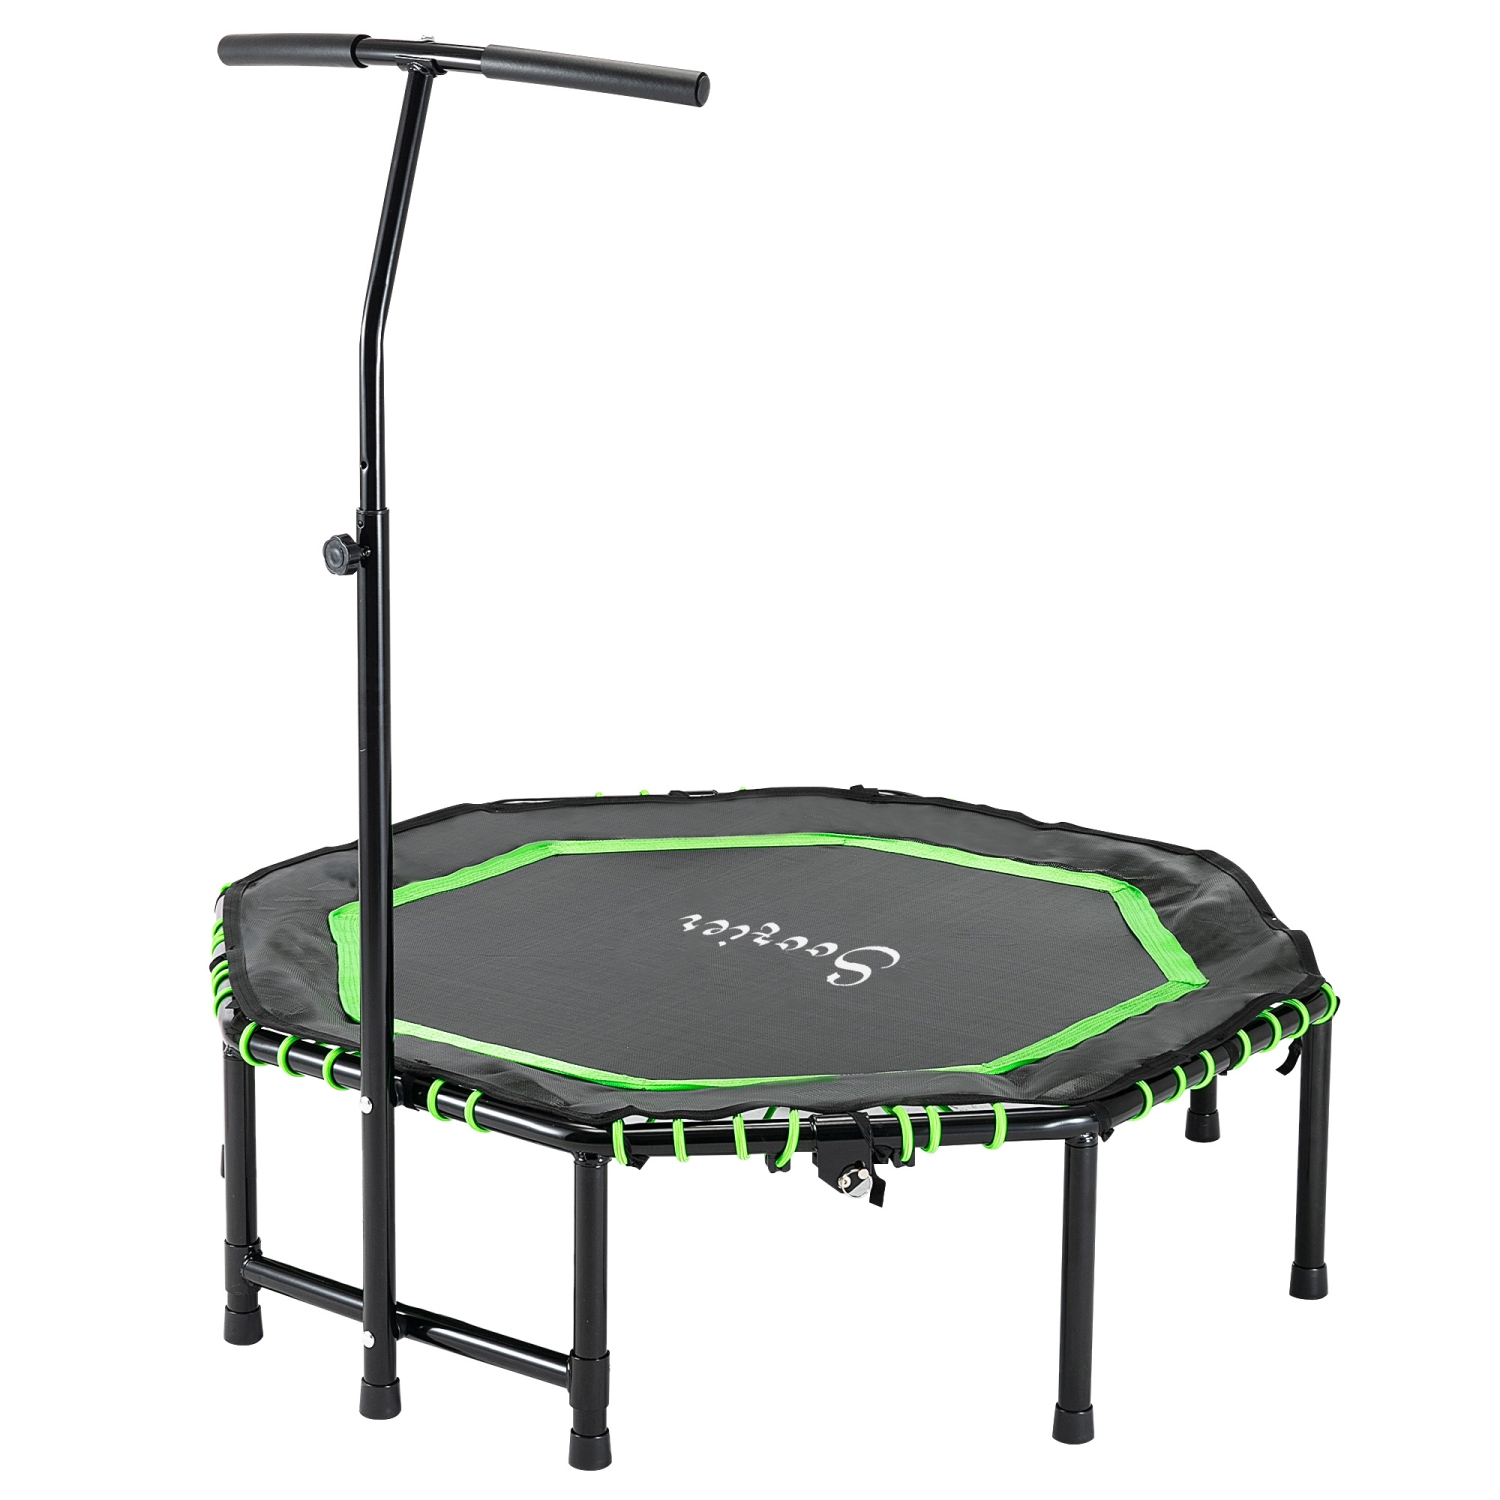 Soozier 48" Mini Trampoline, Foldable Trampoline with Adjustable Handle Bar for Adults Exercise, Workout, Fitness, Green